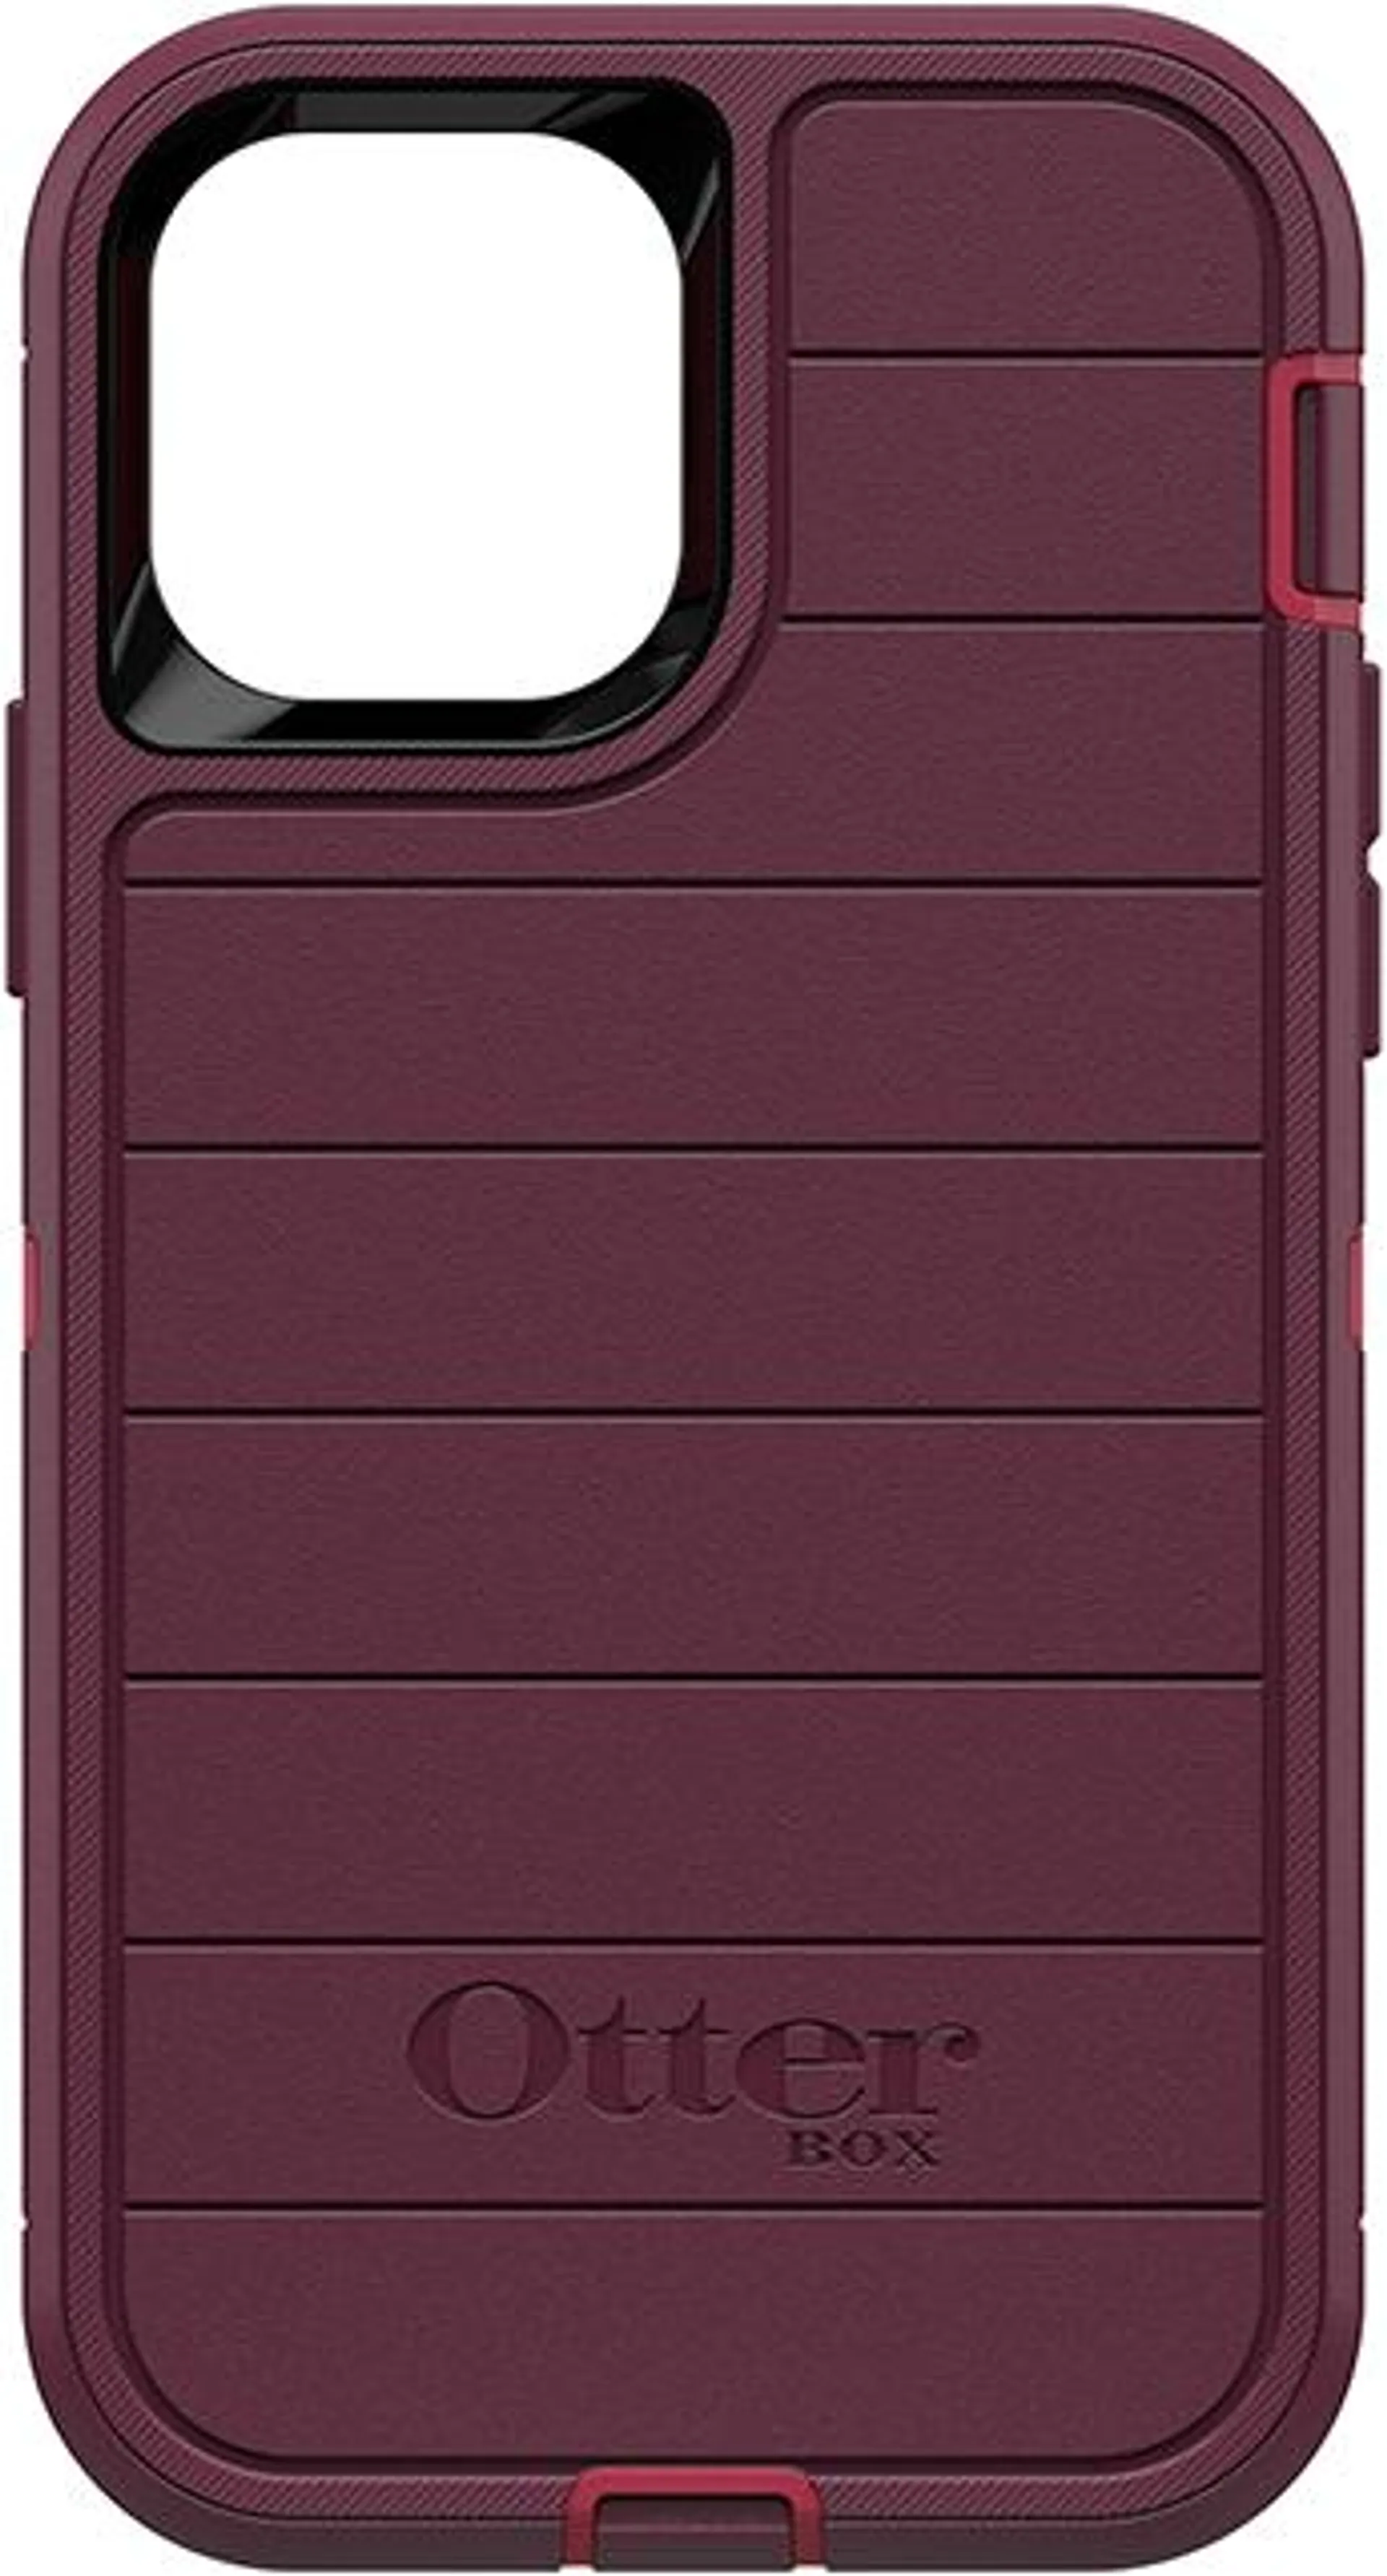 OtterBox Defender Pro Series Case and Holster - iPhone 12/12 Pro